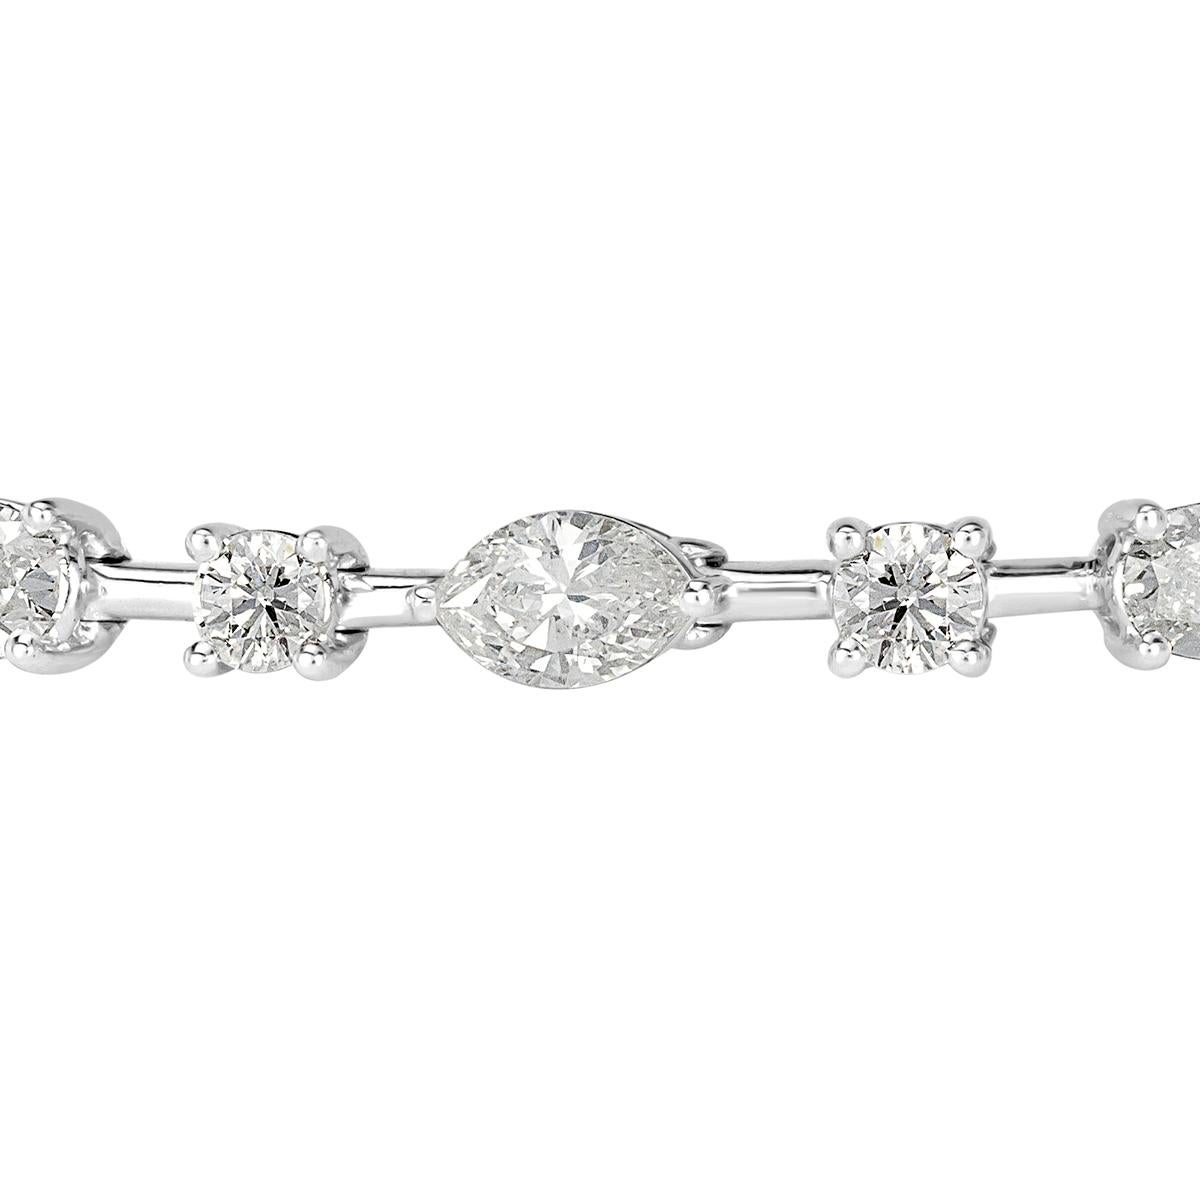 Custom created in 18k white gold, this ravishing diamond bracelet features 5.81ct of oval, marquise and round brilliant cut diamonds graded at F-G, VS1-VS2. Each individual diamond average 0.25ct.  
